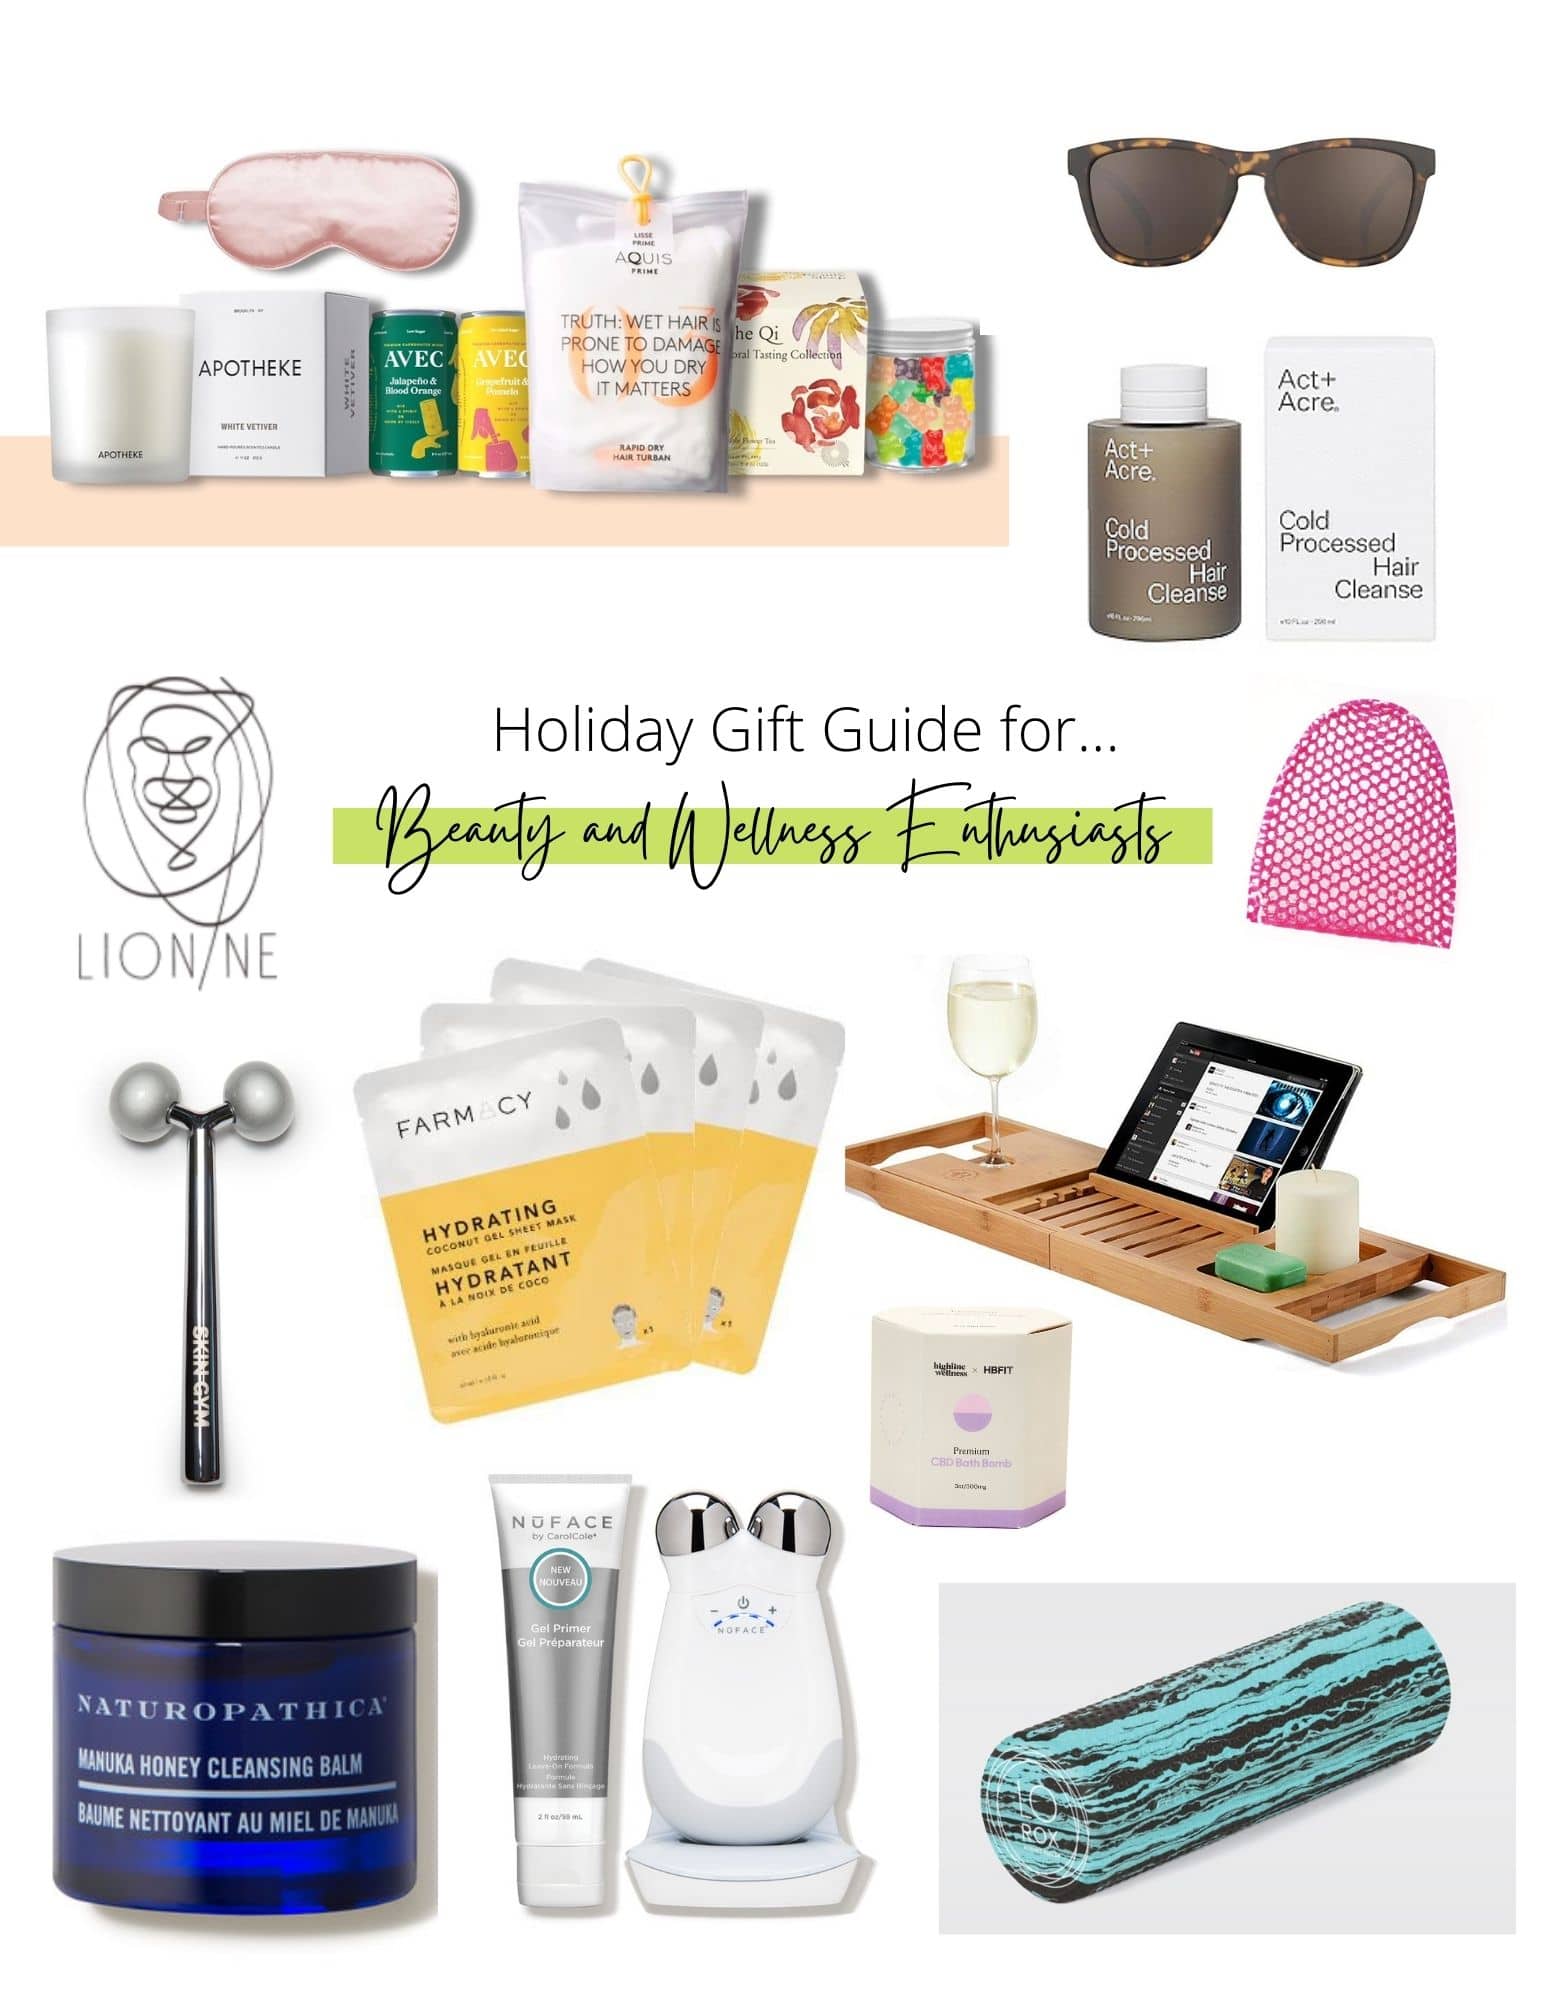 Collage of gift ideas for beauty and wellness lovers.